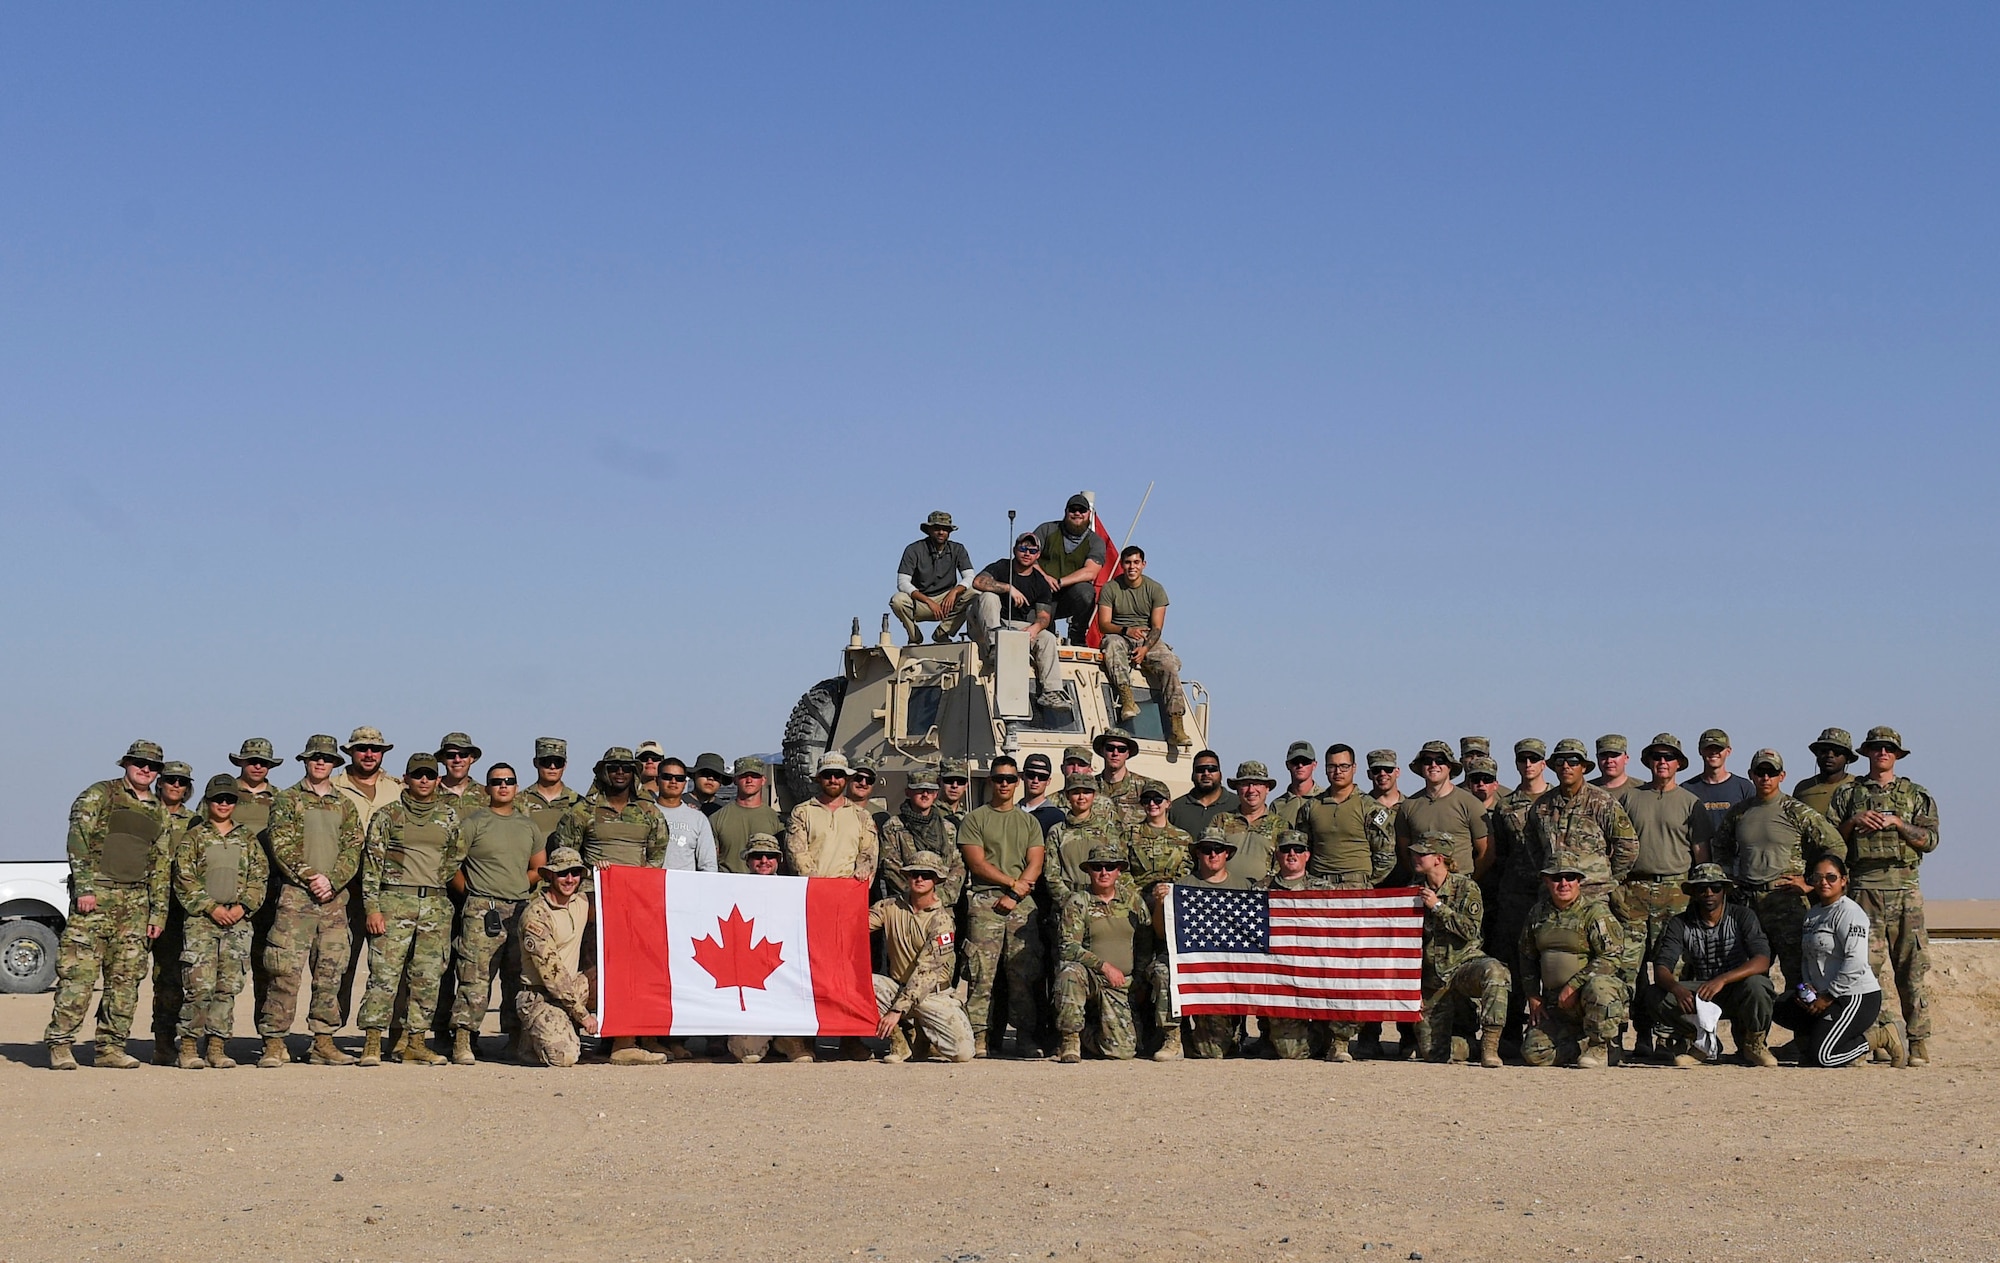 U.S. Army Soldiers, U.S. Air Force Airmen and Canadian Armed Forces members pose for a photo at the Udairi Range Complex, Kuwait, Oct. 12, 2020.